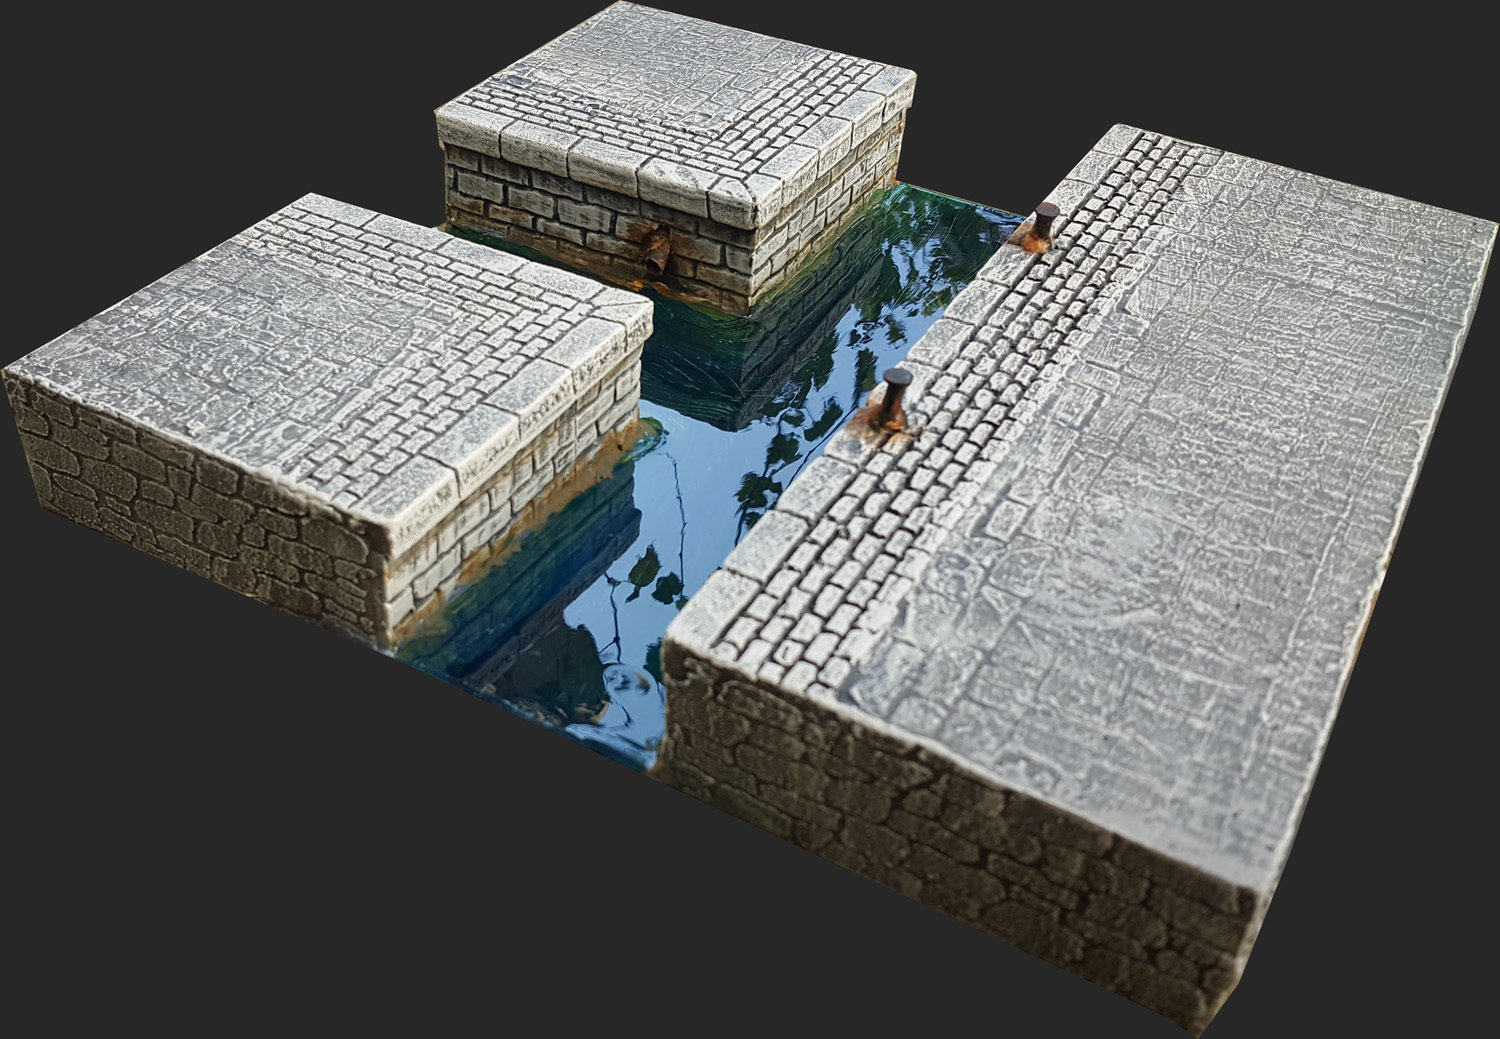 Canal System combined with Harbours and Slope & Rises for a full 3D 3x3 Urban Board (Medieval Theme)